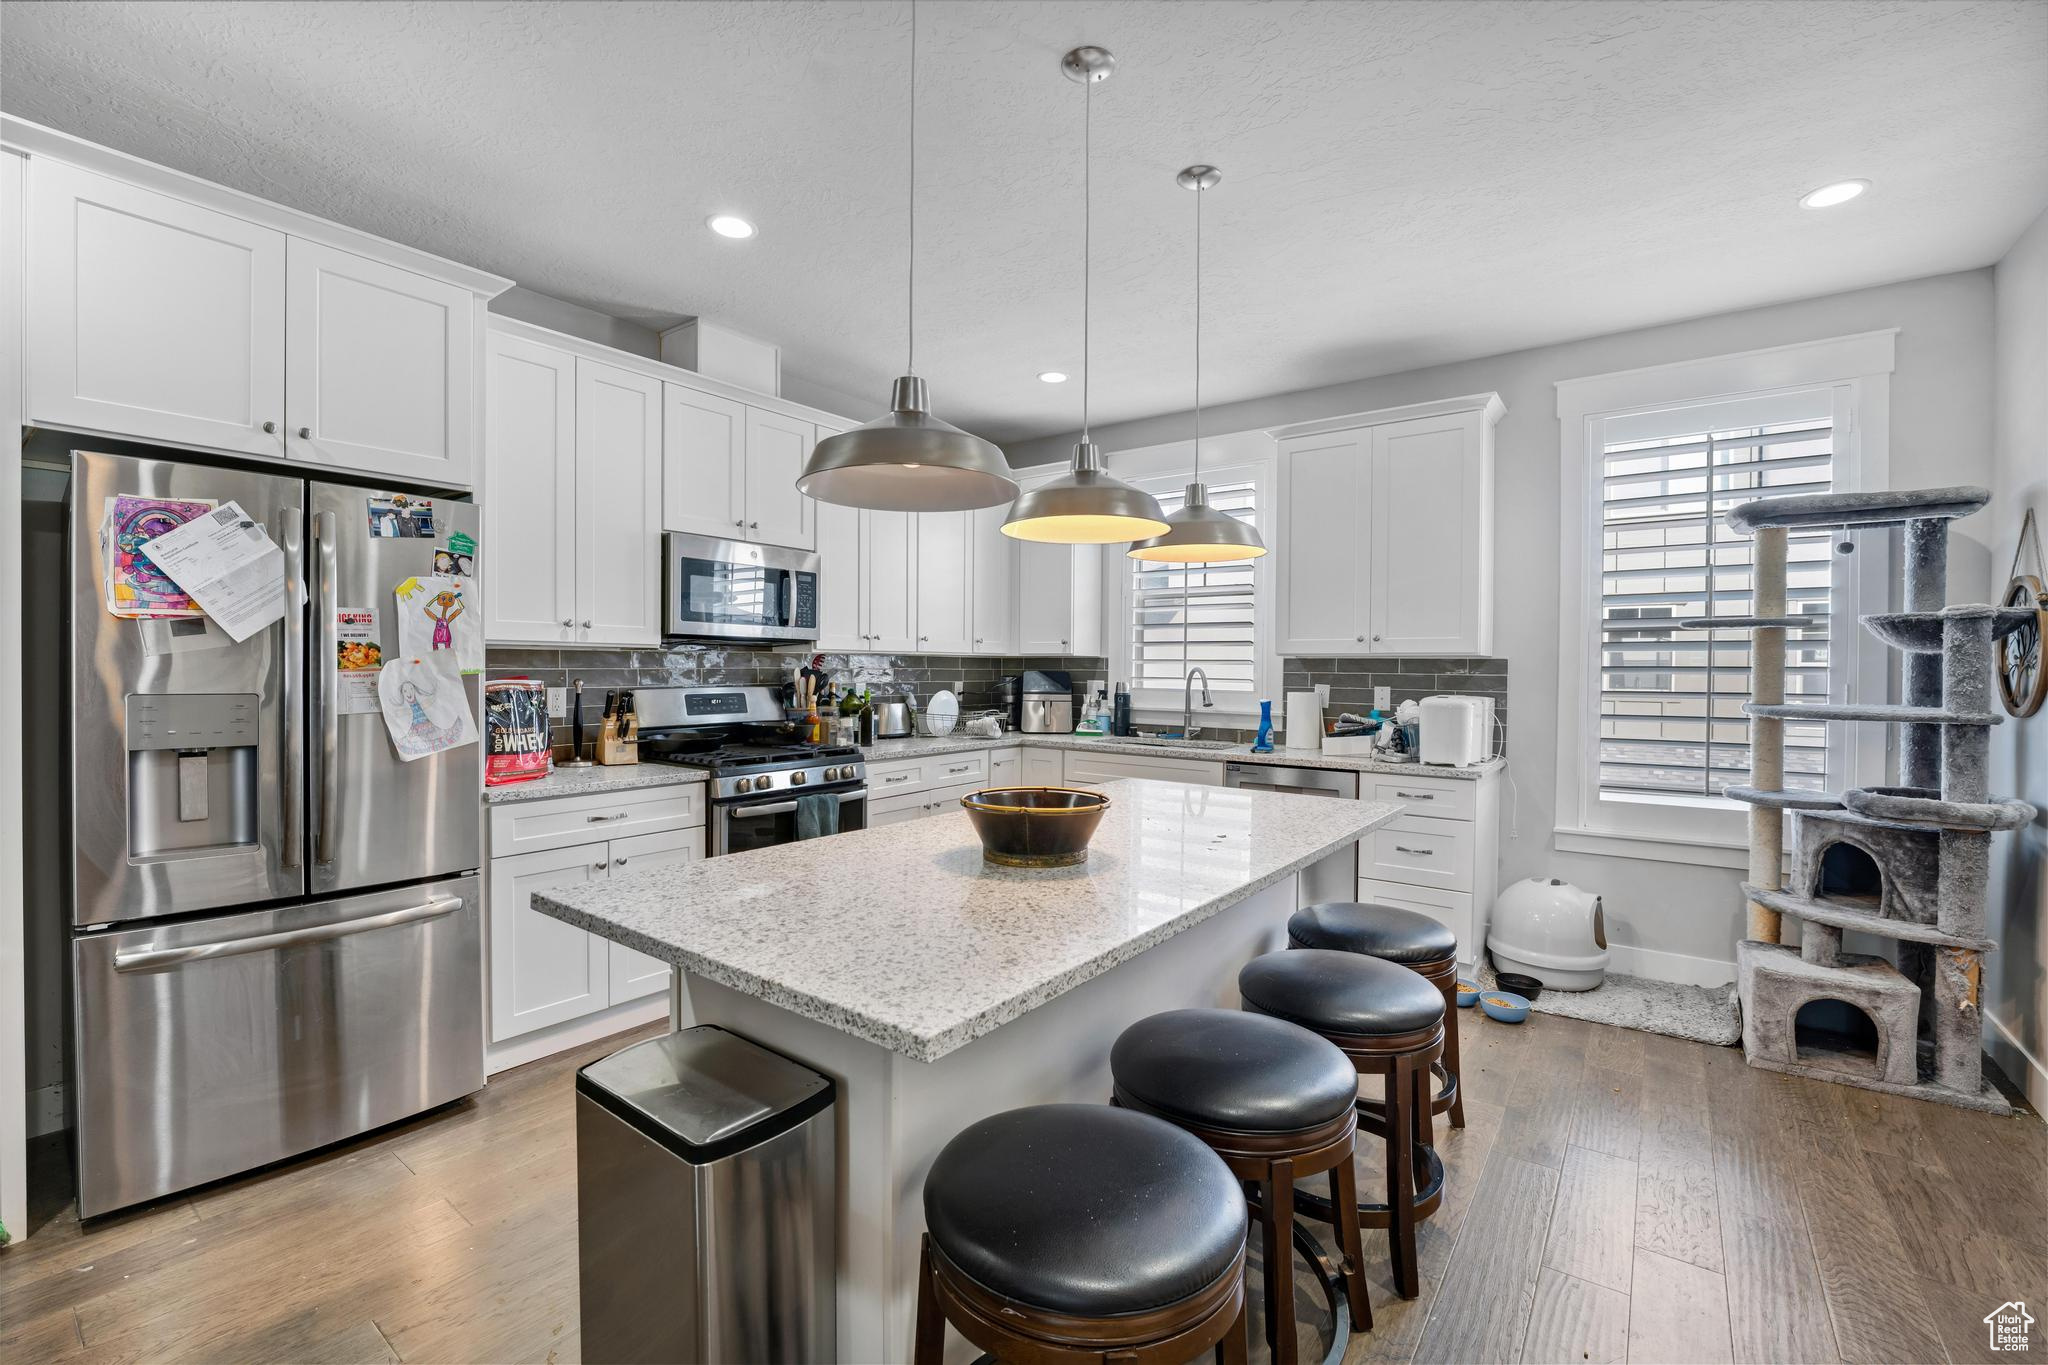 Kitchen featuring a kitchen island, light wood-type flooring, tasteful backsplash, decorative light fixtures, and appliances with stainless steel finishes